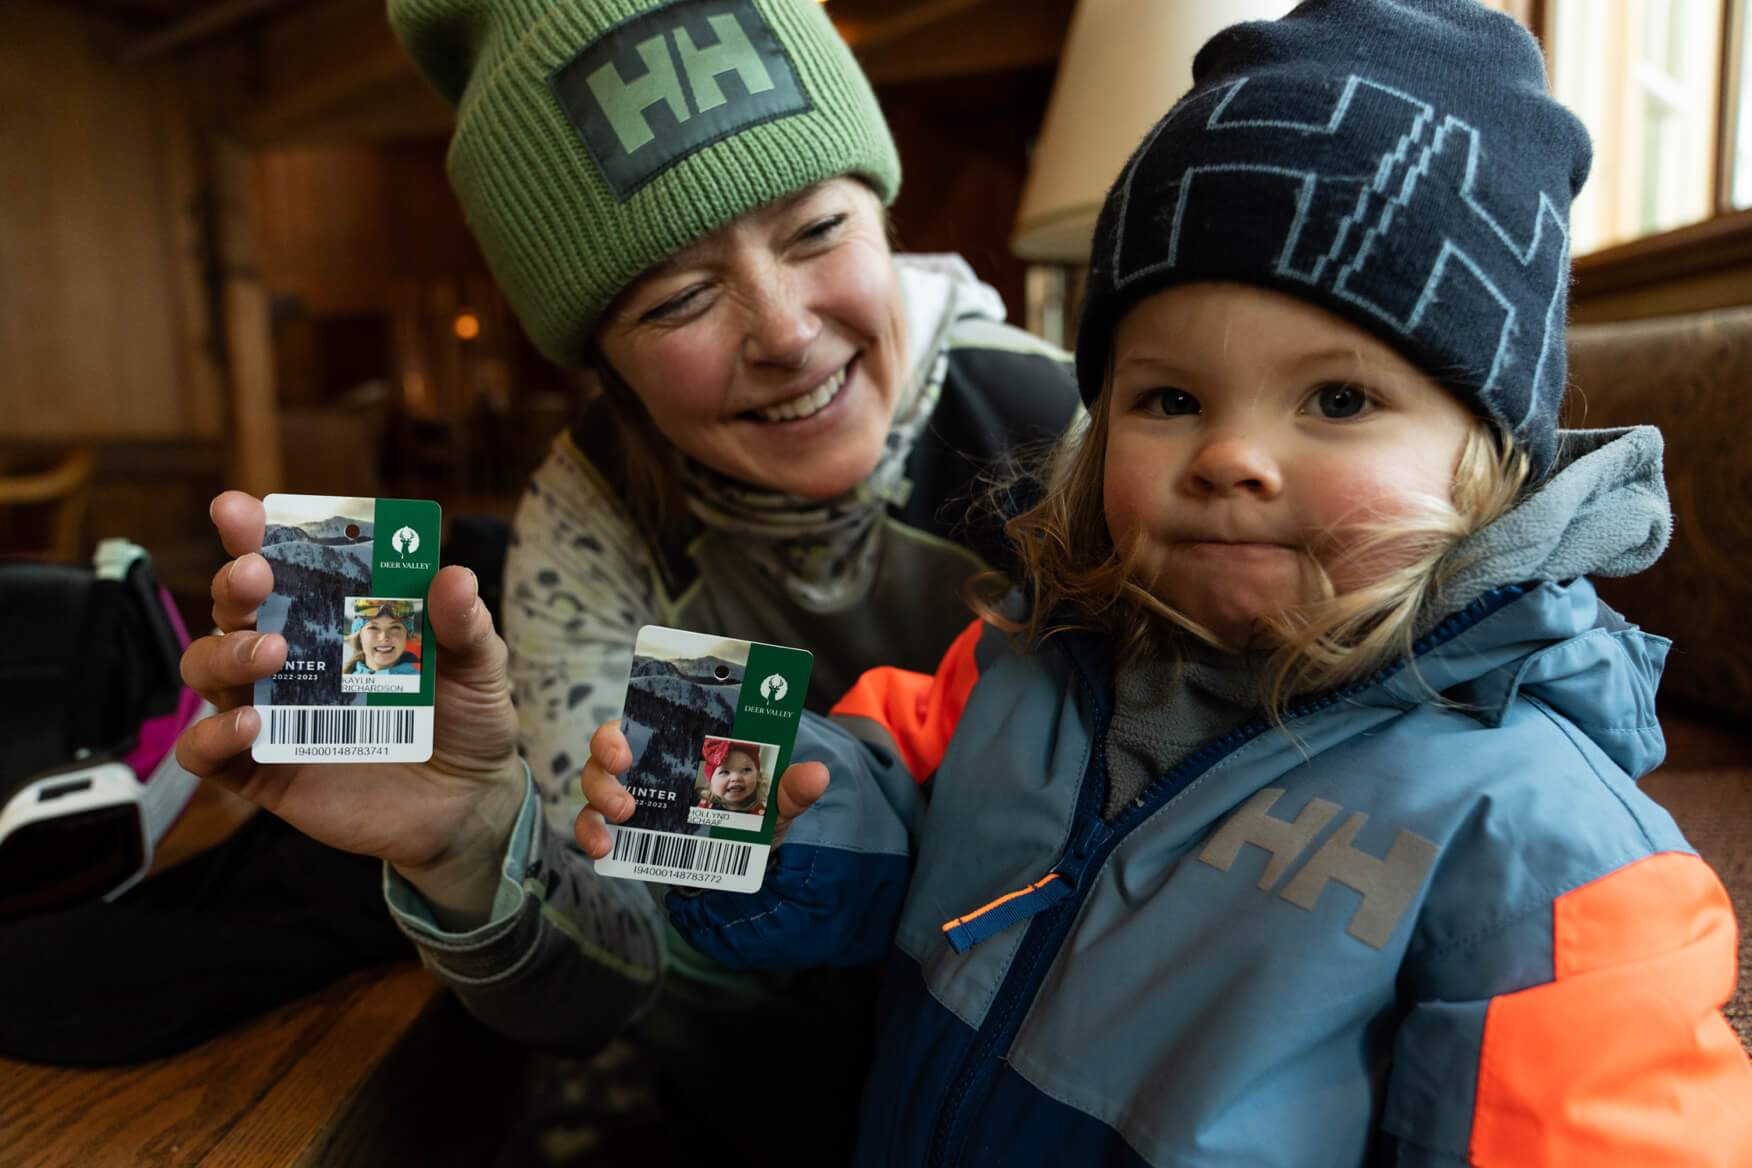 kaylin and her daughter holding ski passes, wearing helly hansen clothing